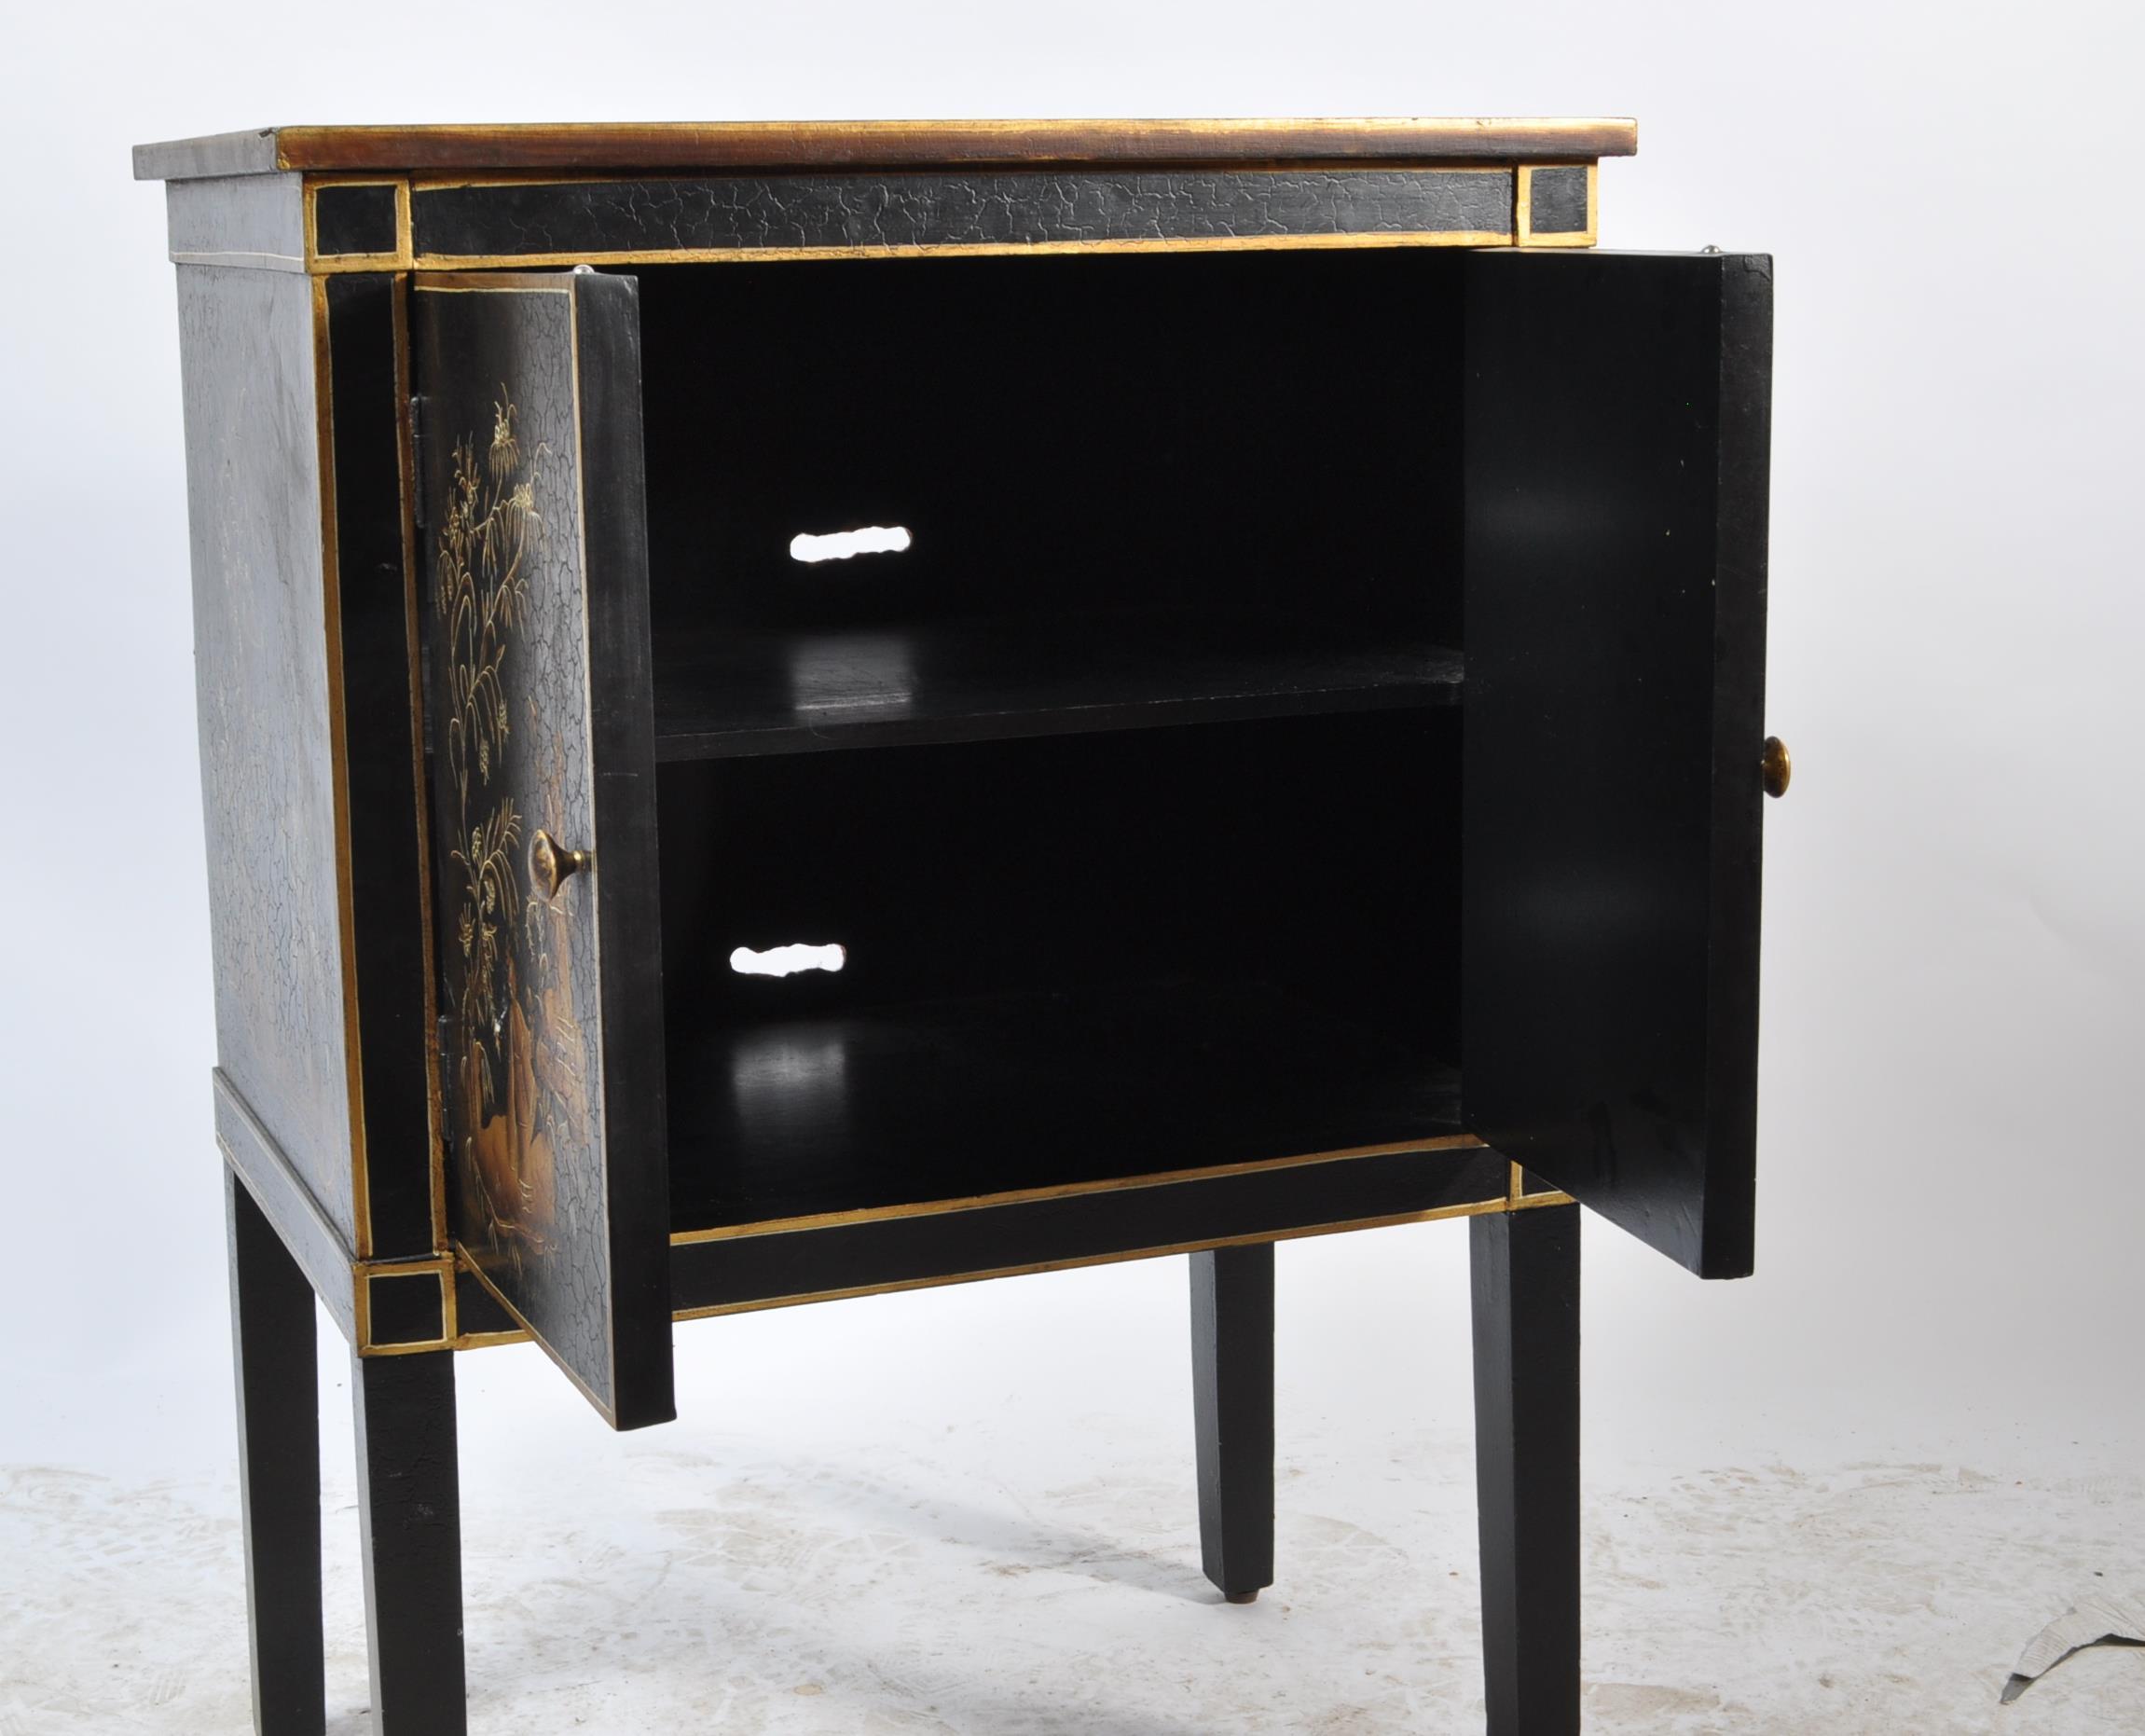 CHINESE ORIENTAL BLACK LACQUER CABINET - Image 5 of 5